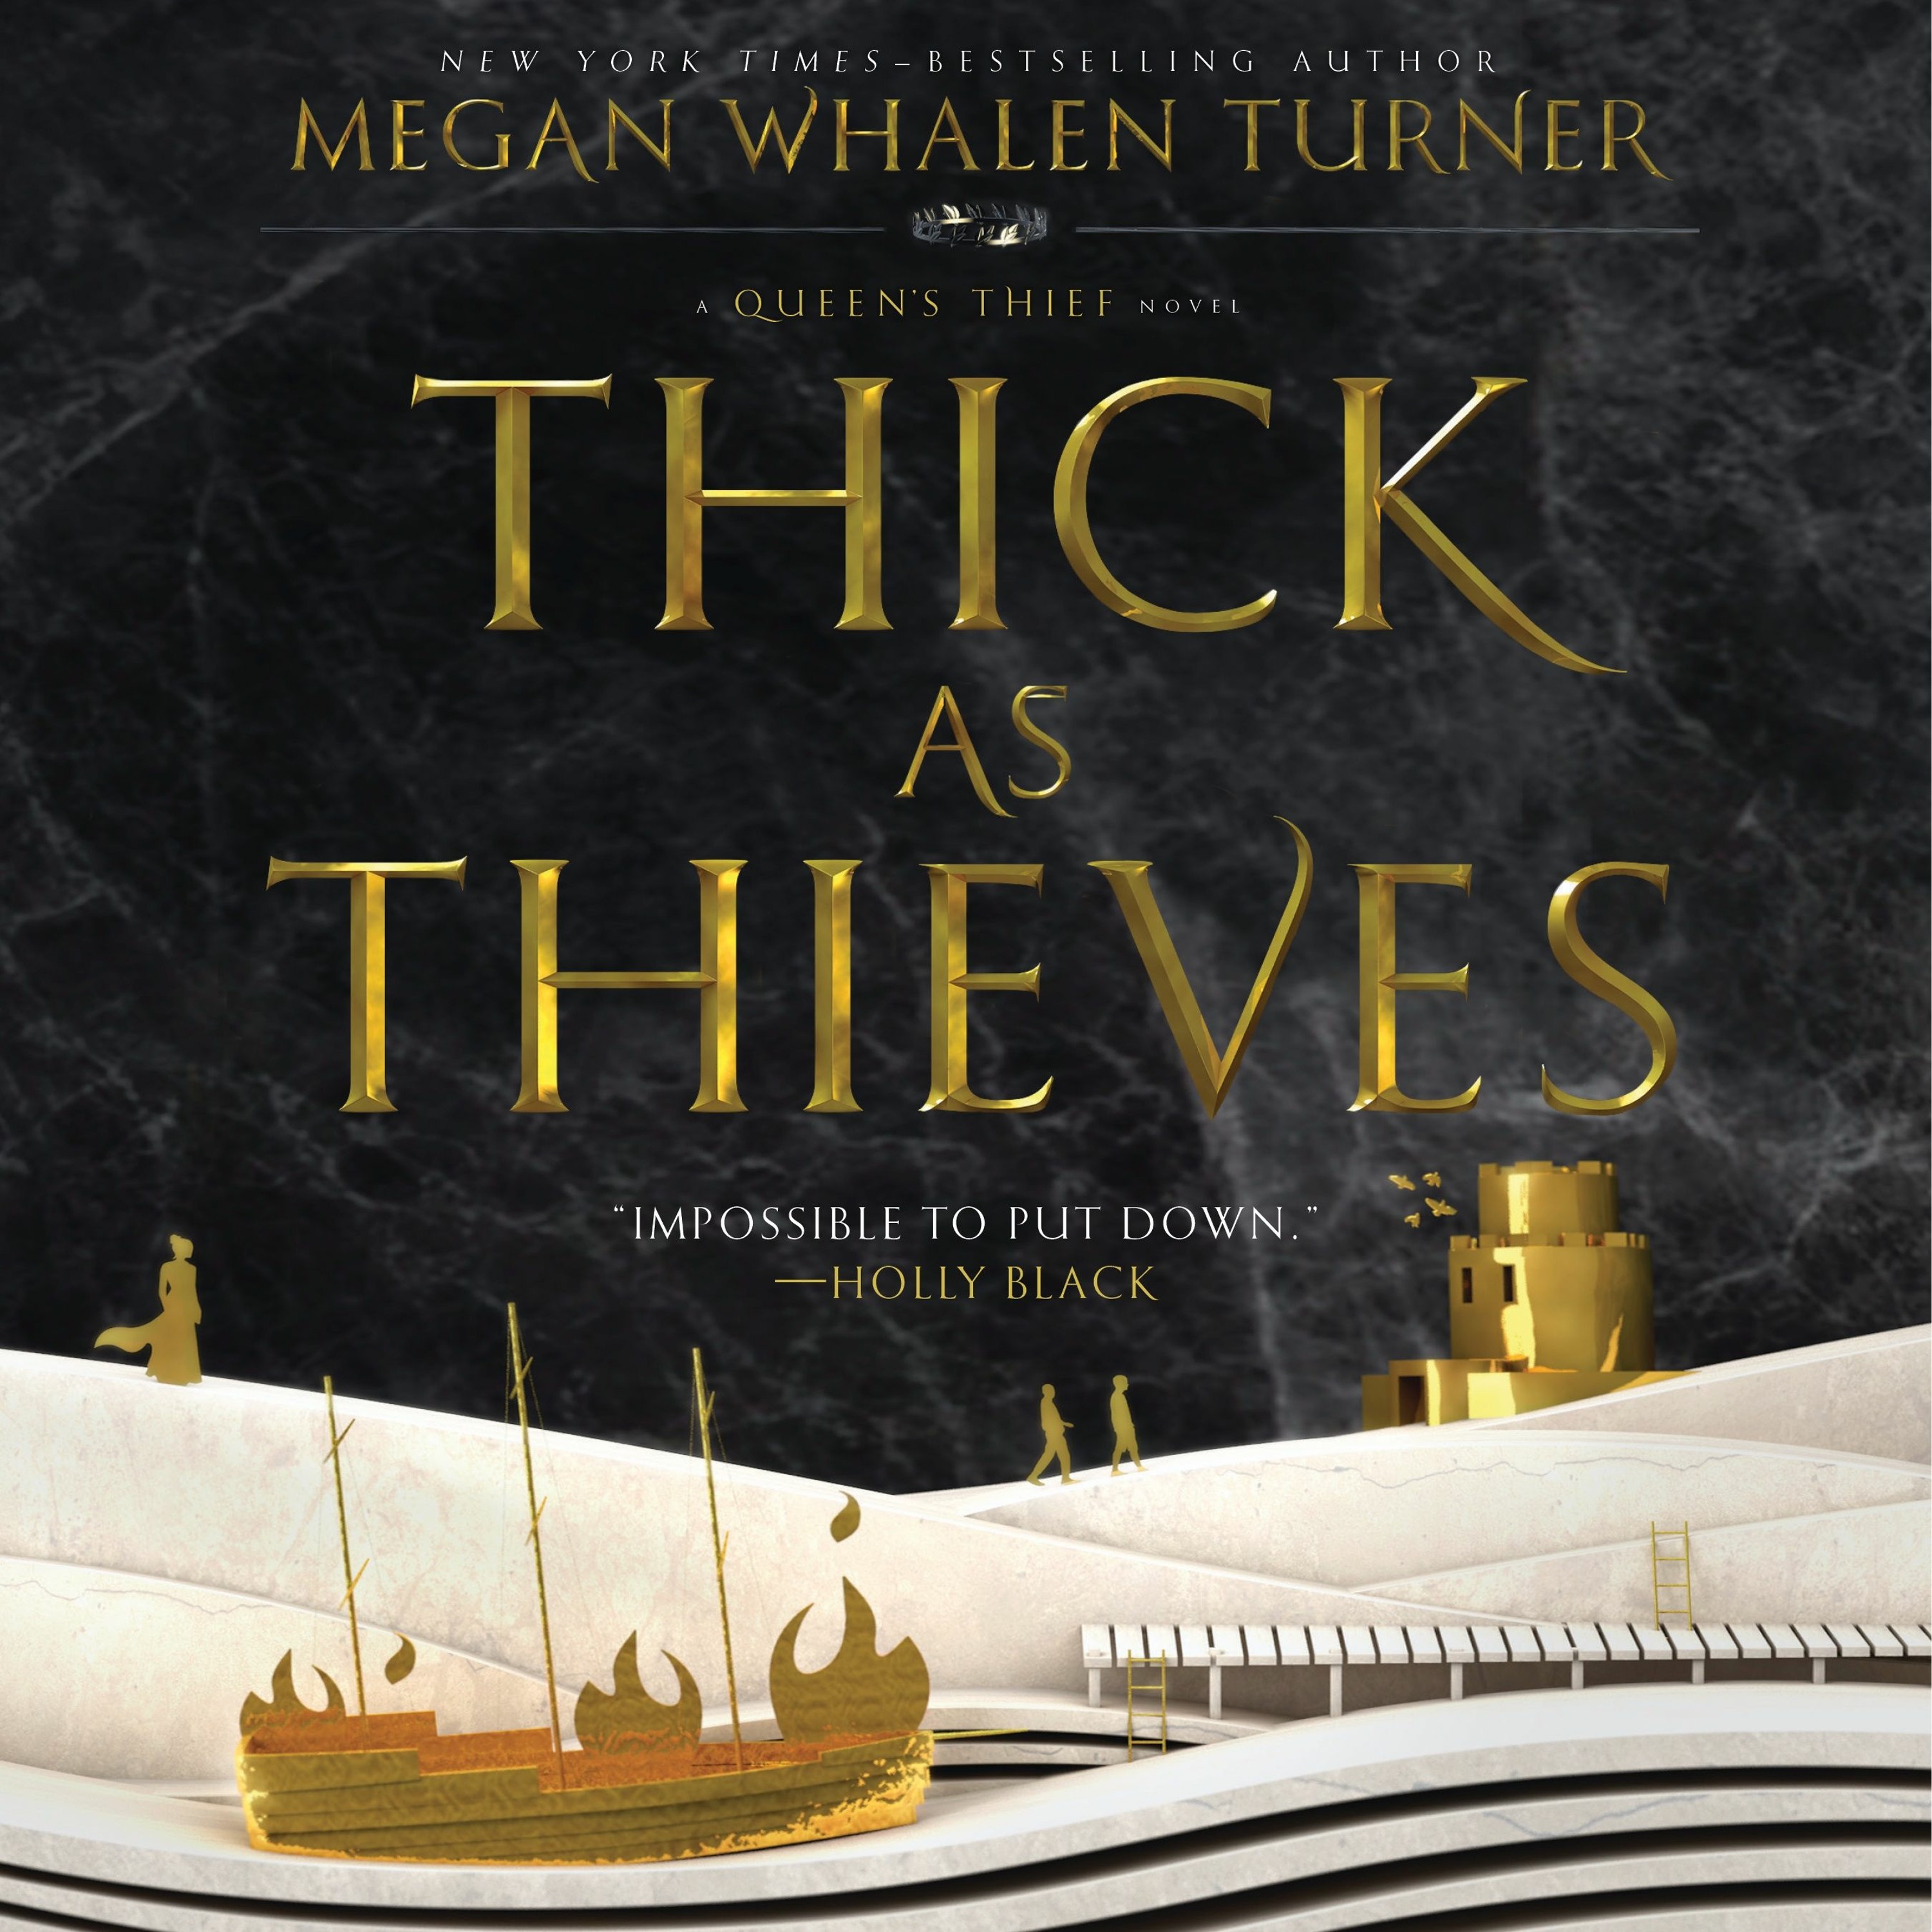 Megan Whalen Turner on THICK AS THIEVES